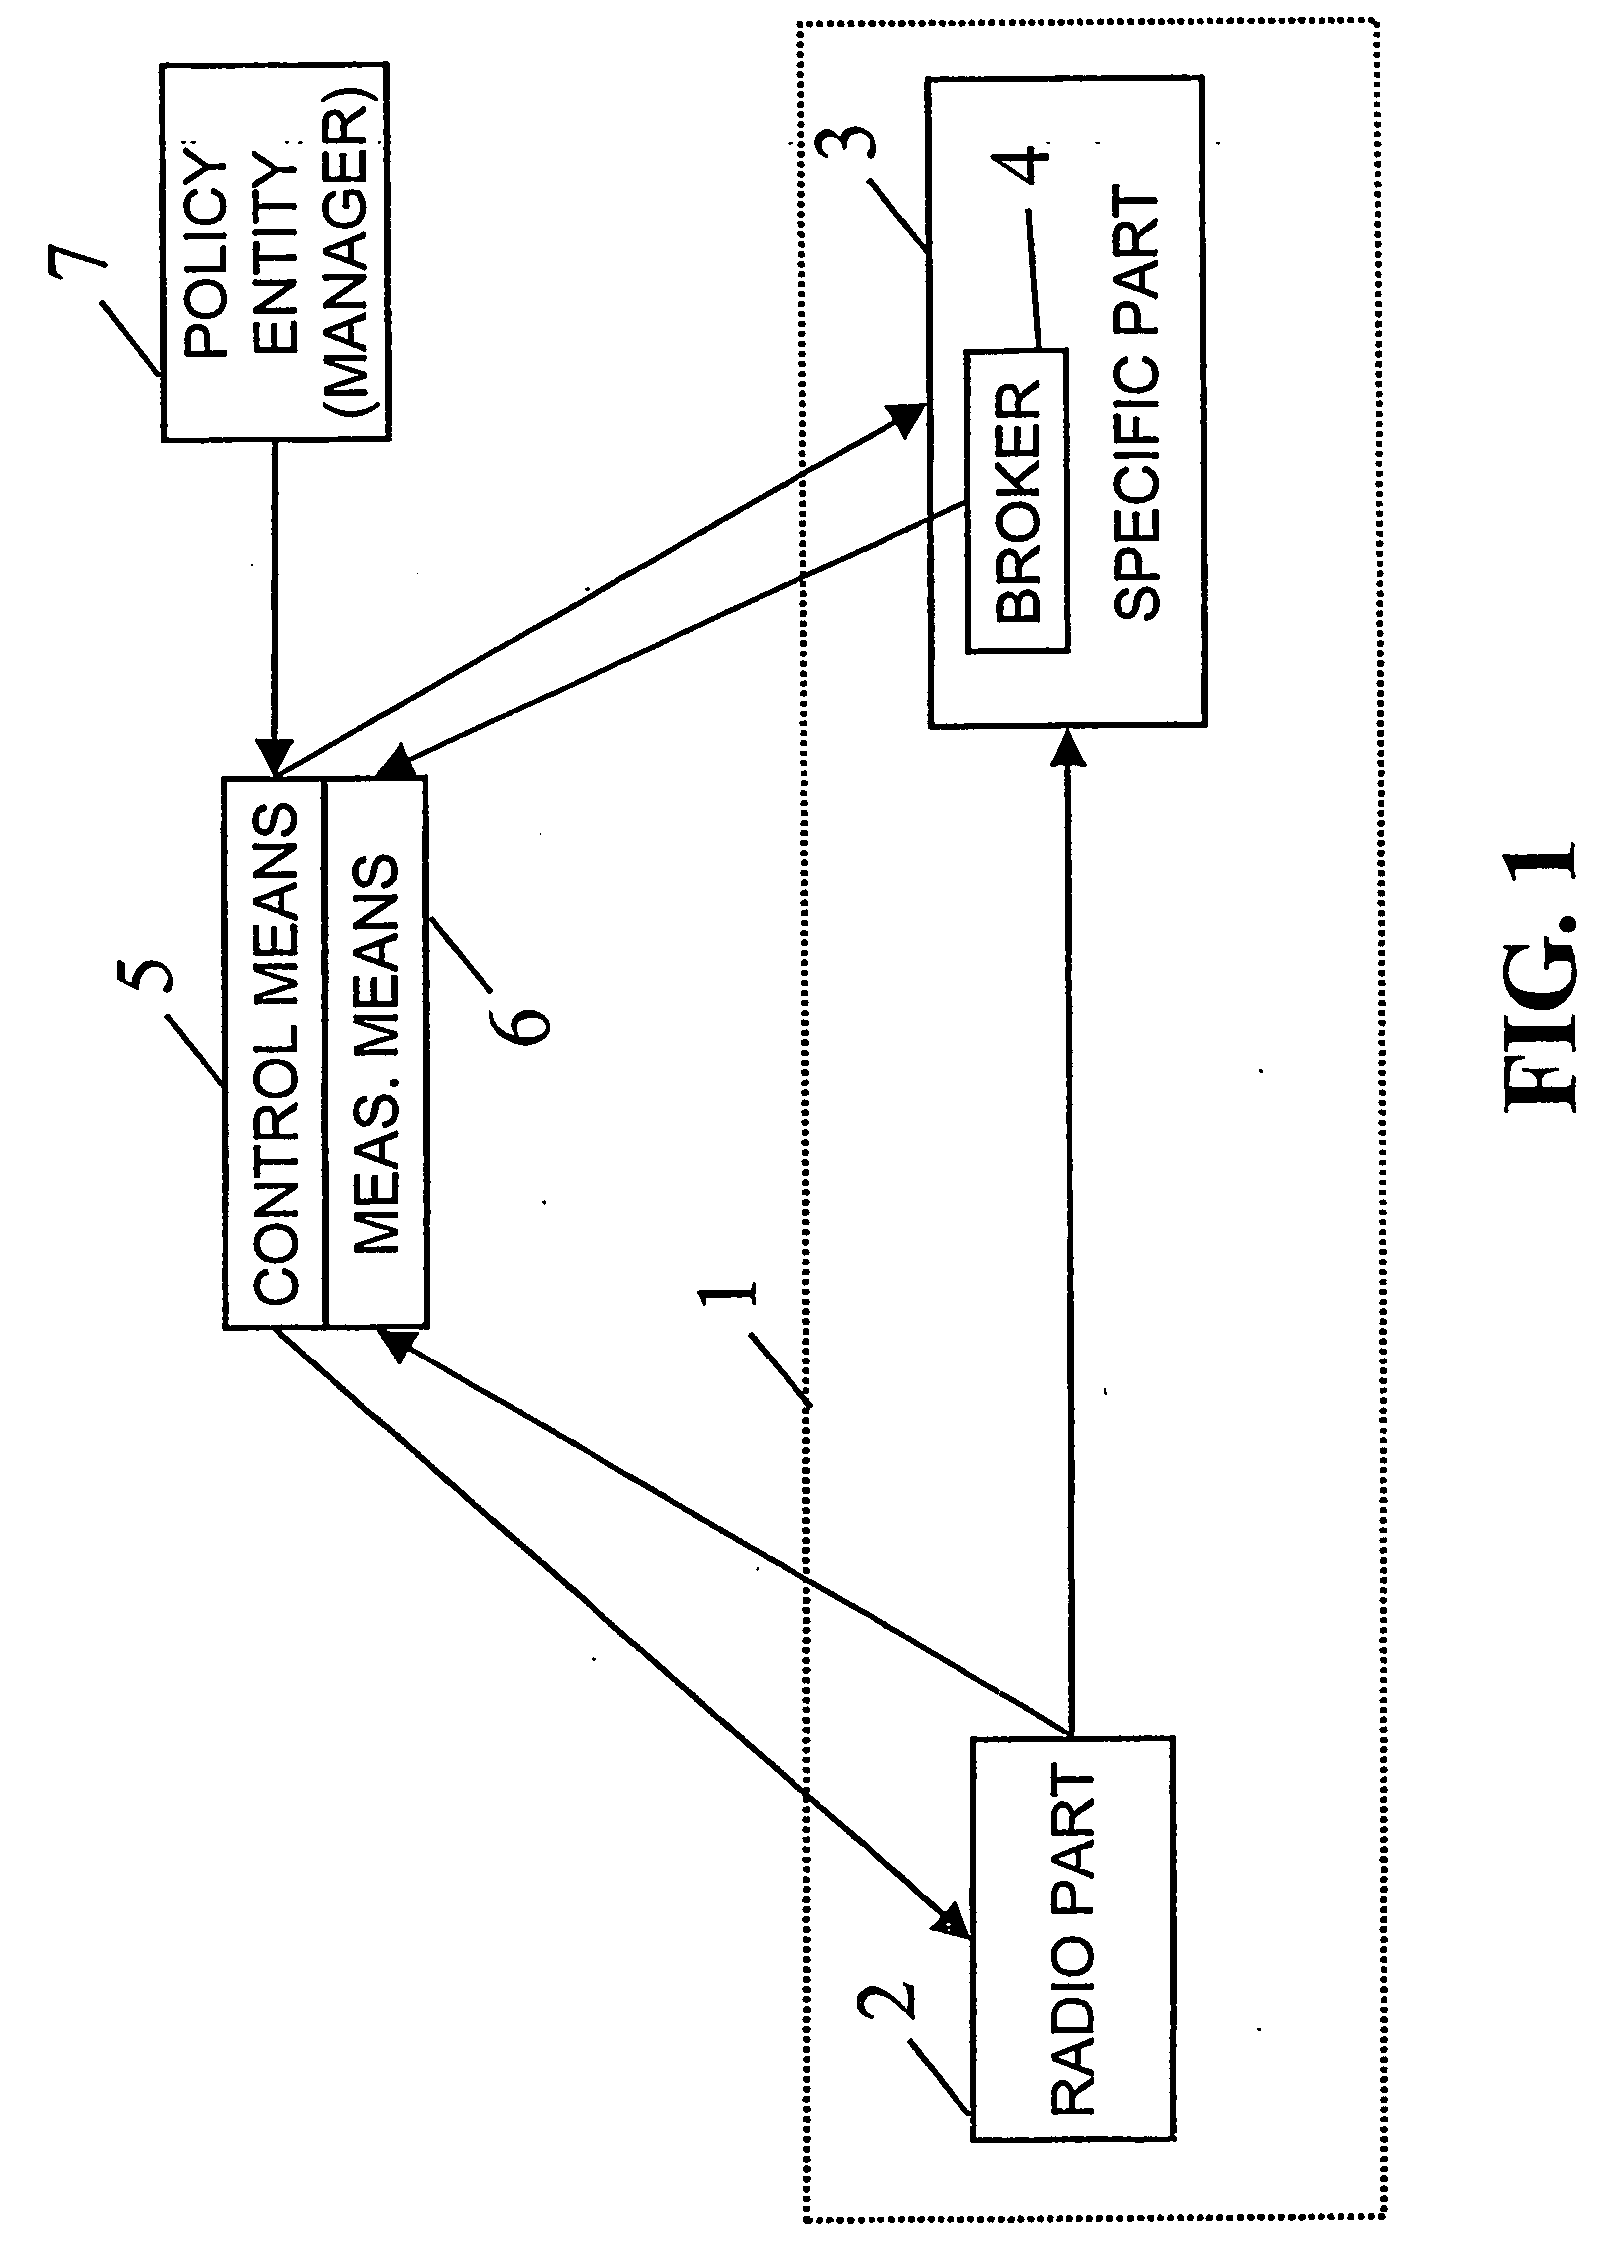 Traffic control in an ip based network